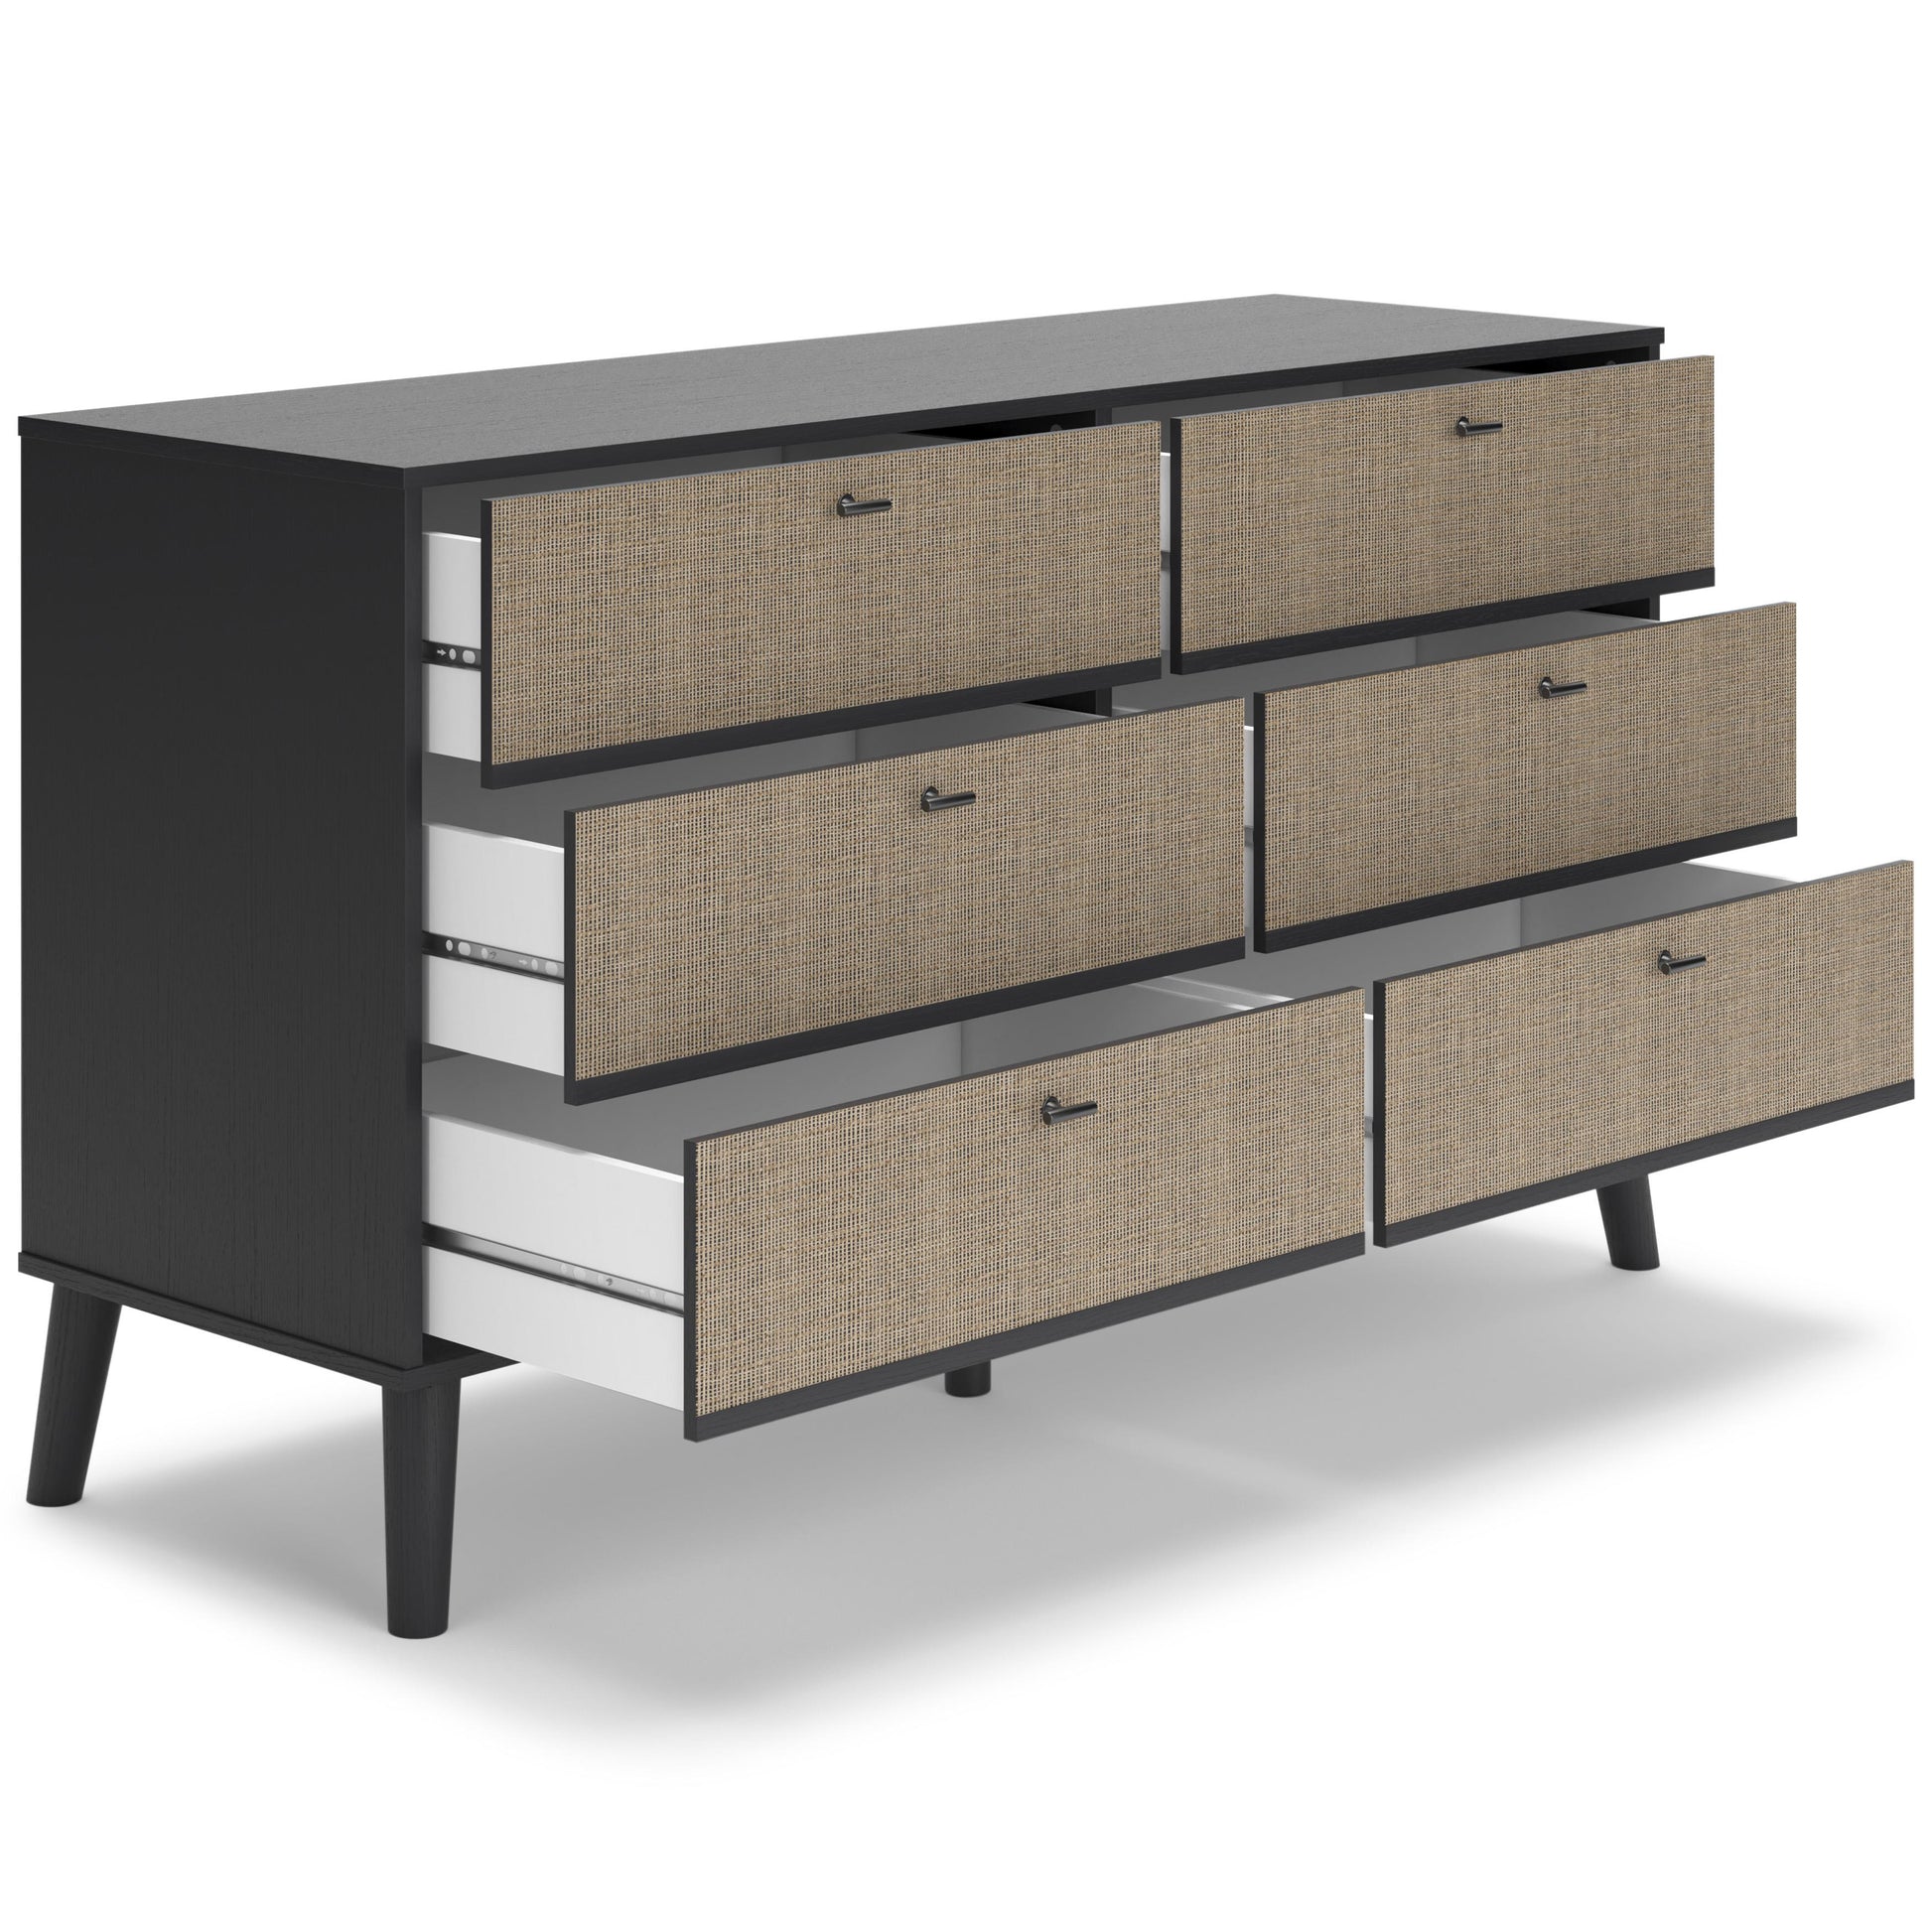 Signature Design by Ashley Charlang 6-Drawer Dresser EB1198-231 IMAGE 2